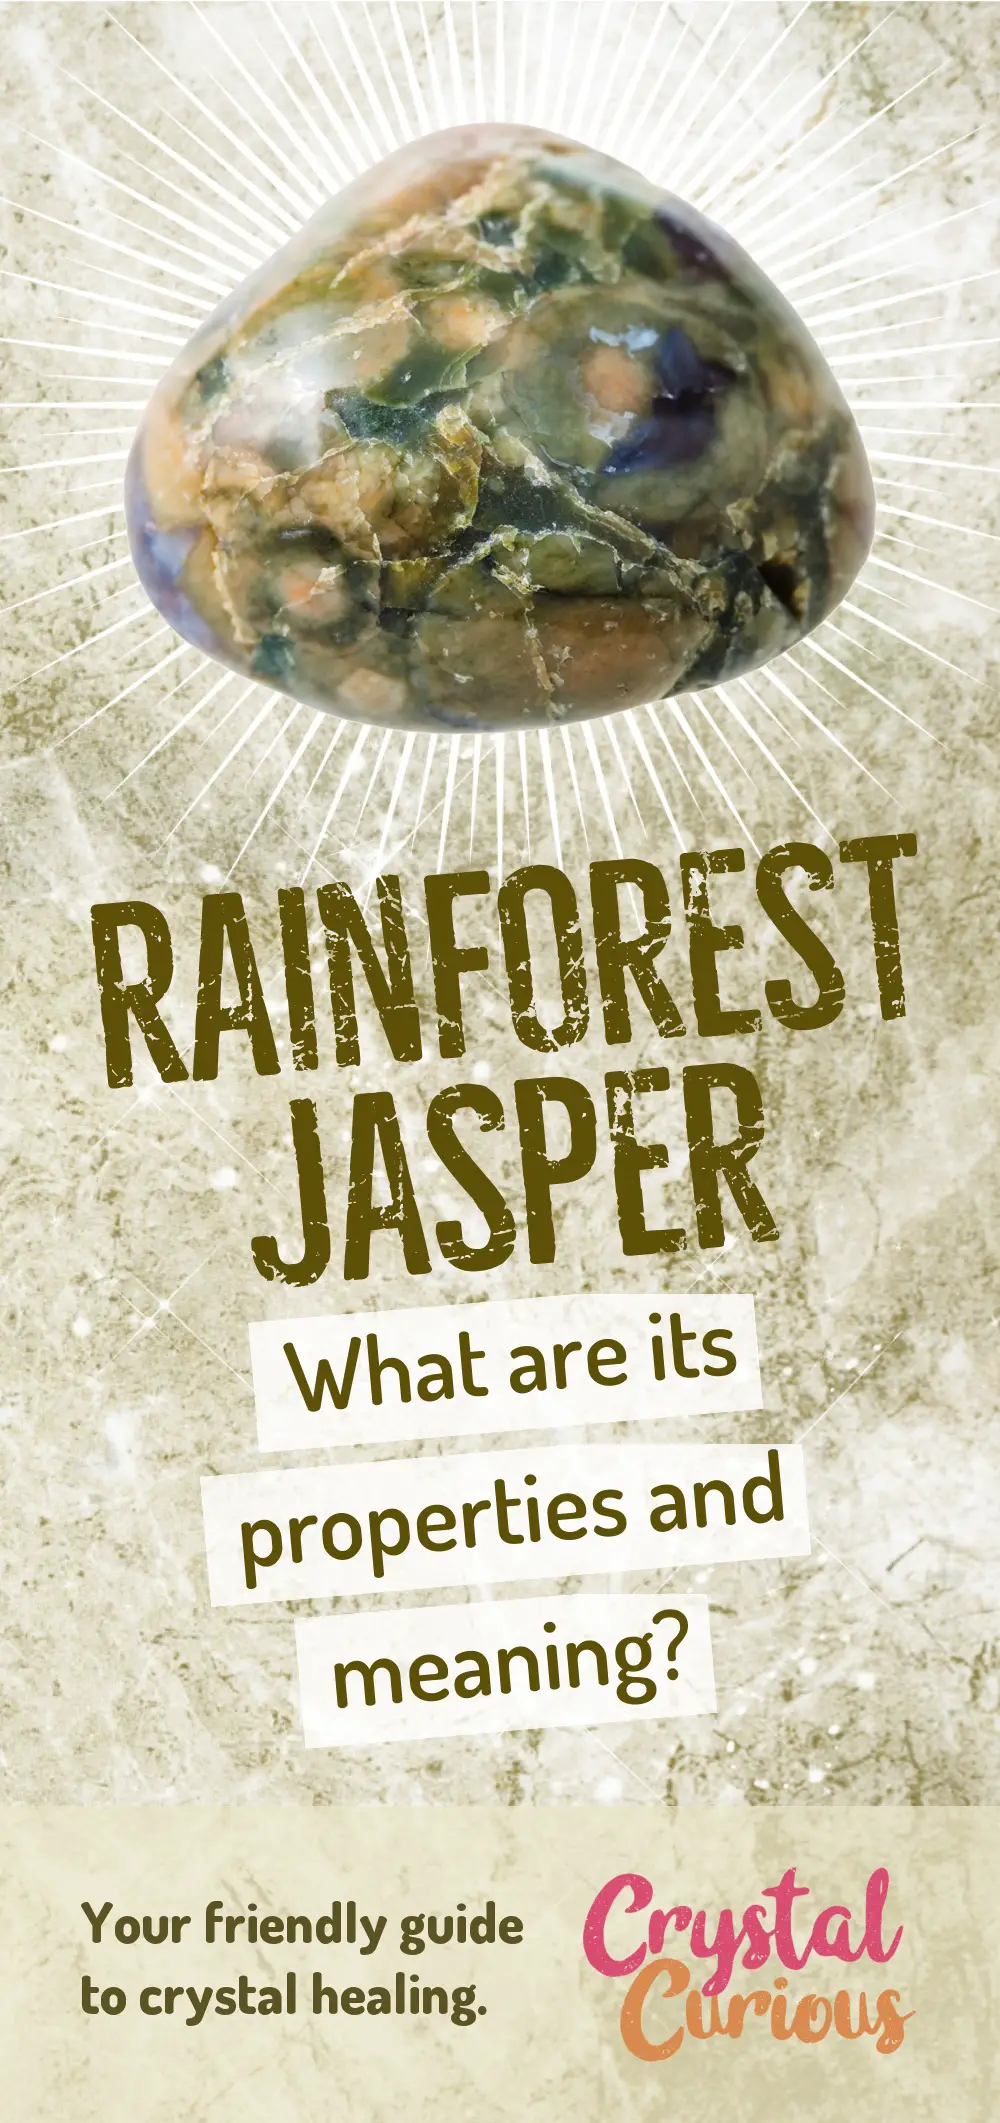 Rainforest Jasper Meaning & Healing Properties. Rainforest Jasper helps you access the wisdom of nature, feel connected to the Earth, and access the energy of new growth to increase your vitality and sense of aliveness. Learn  about healing crystals for beginners and gemstones properties at CrystalCurious.com. Create positive energy and learn new age healing techniques with crystal therapy. #crystals #crystalhealing #newage  #positiveenergy  #gemstones #energyhealing  #crystalcurious